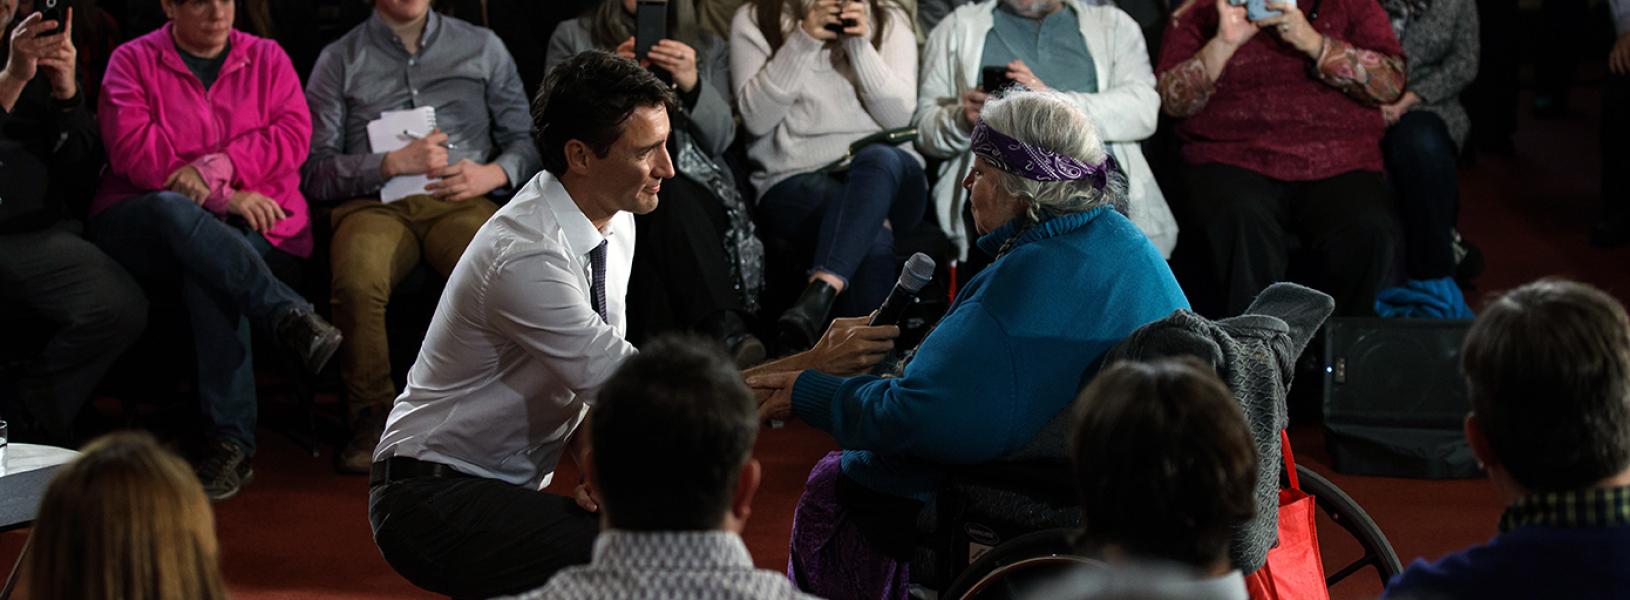 Prime Minister Justin Trudeau kneels on the floor to take a question from Laurel Claus-Johnson, who sits in a wheelchair, during a town hall in Kingston in January 2017.